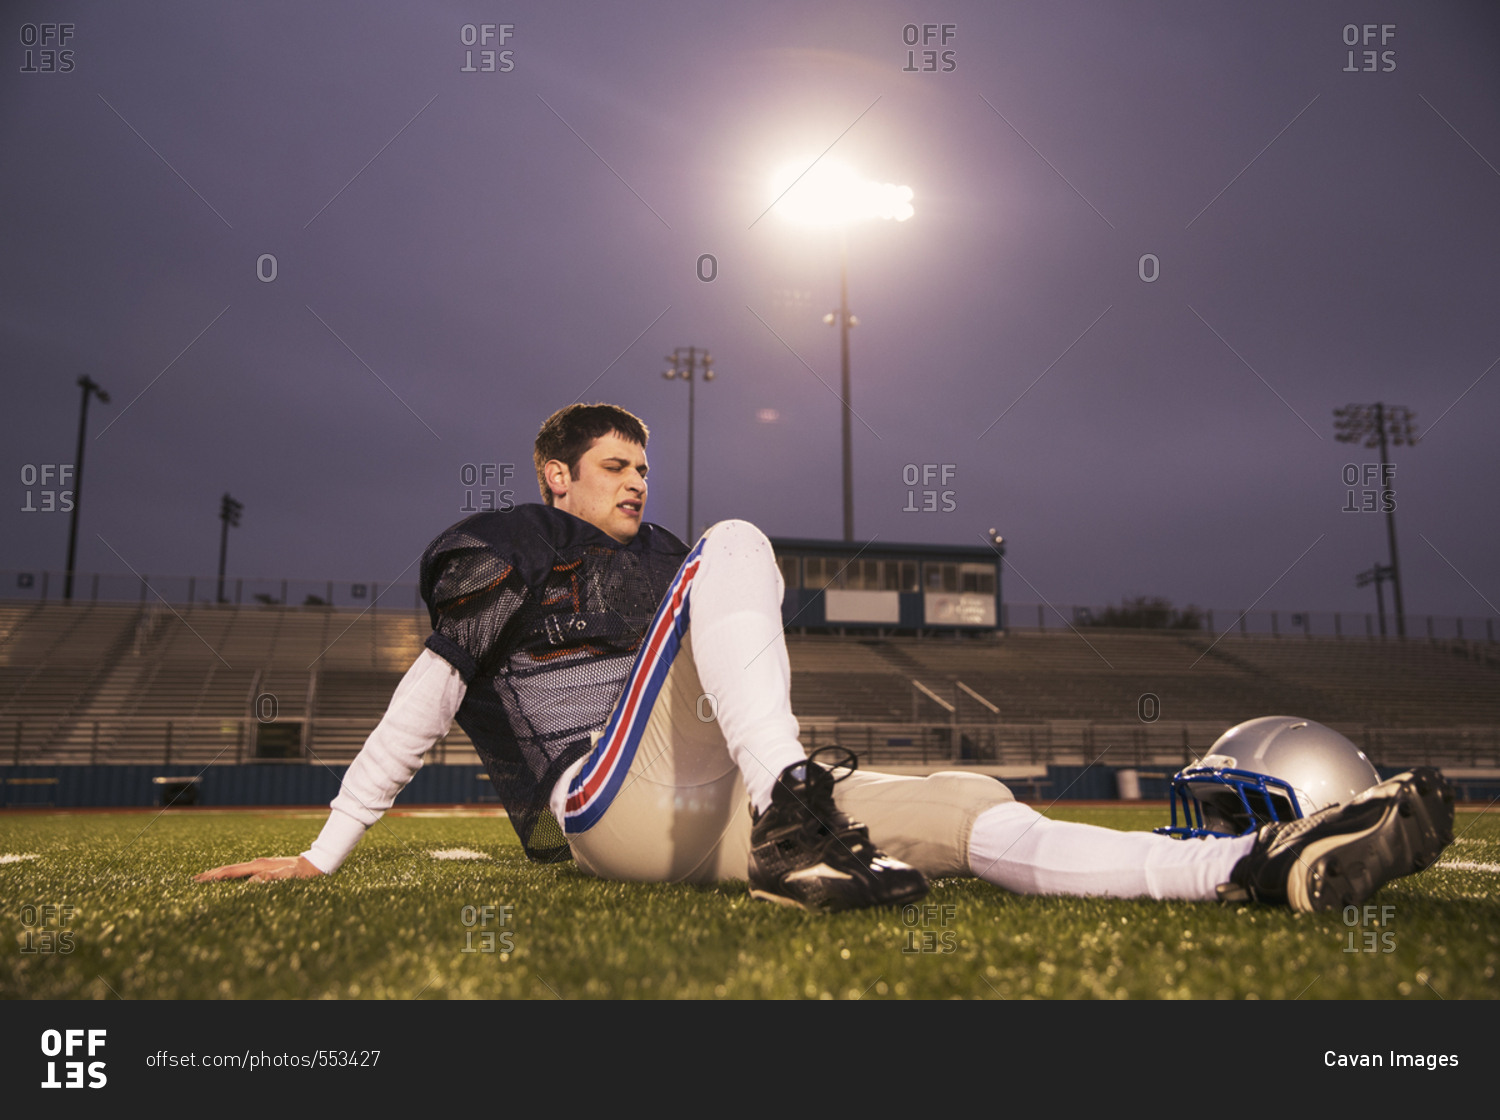 American football player relaxing on grassy field at stadium against sky